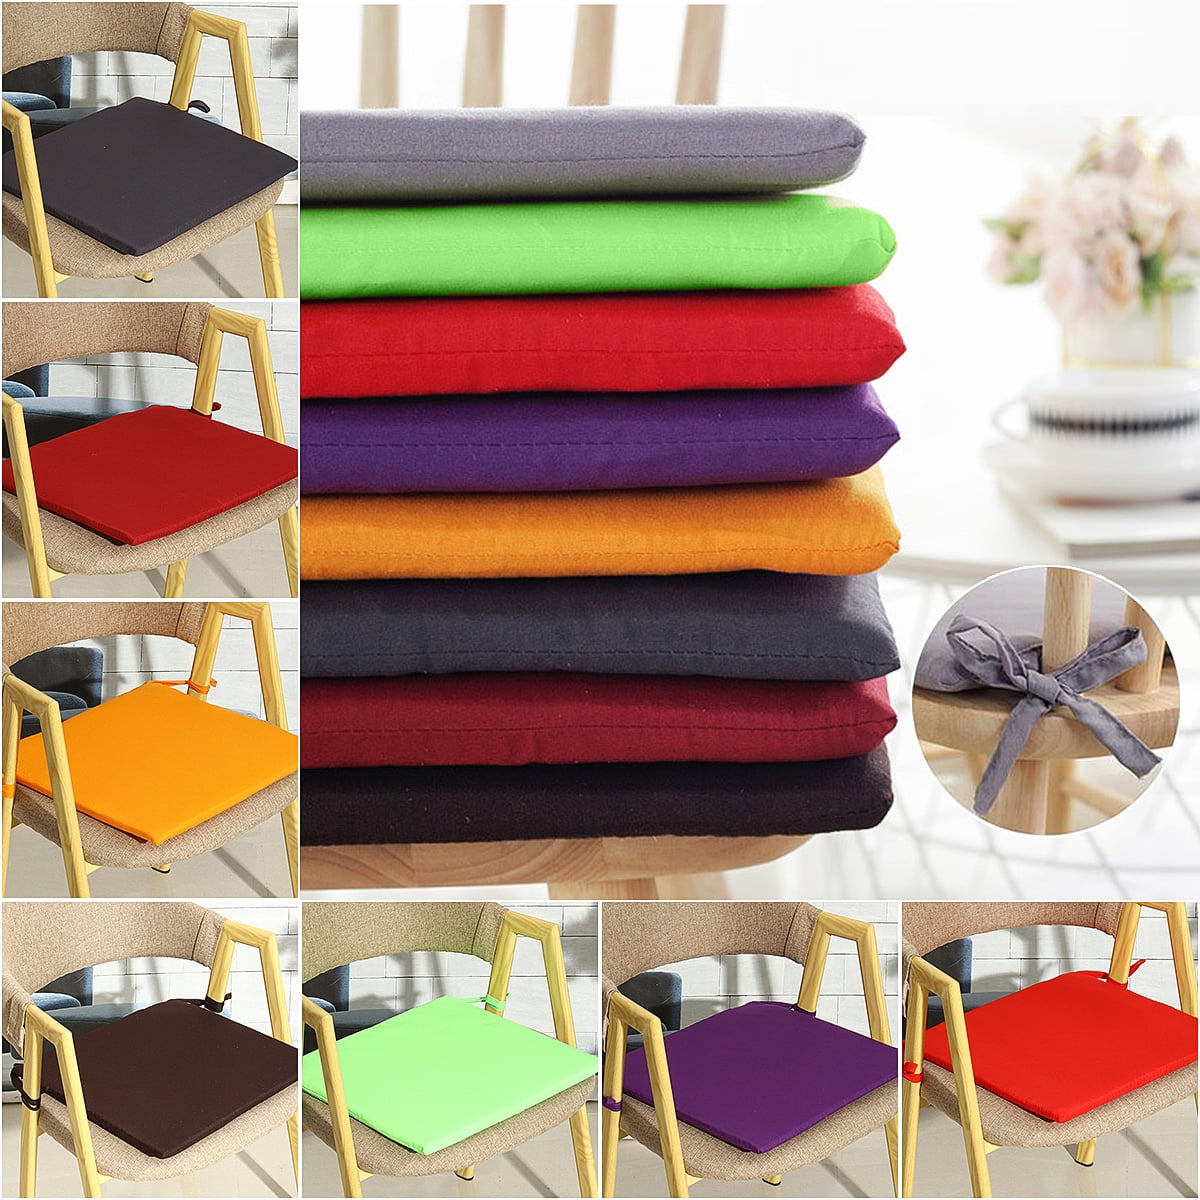 Home Kitchen Office Soft Chair Seat Cushion Comfort Pads Indoor Garden Patio